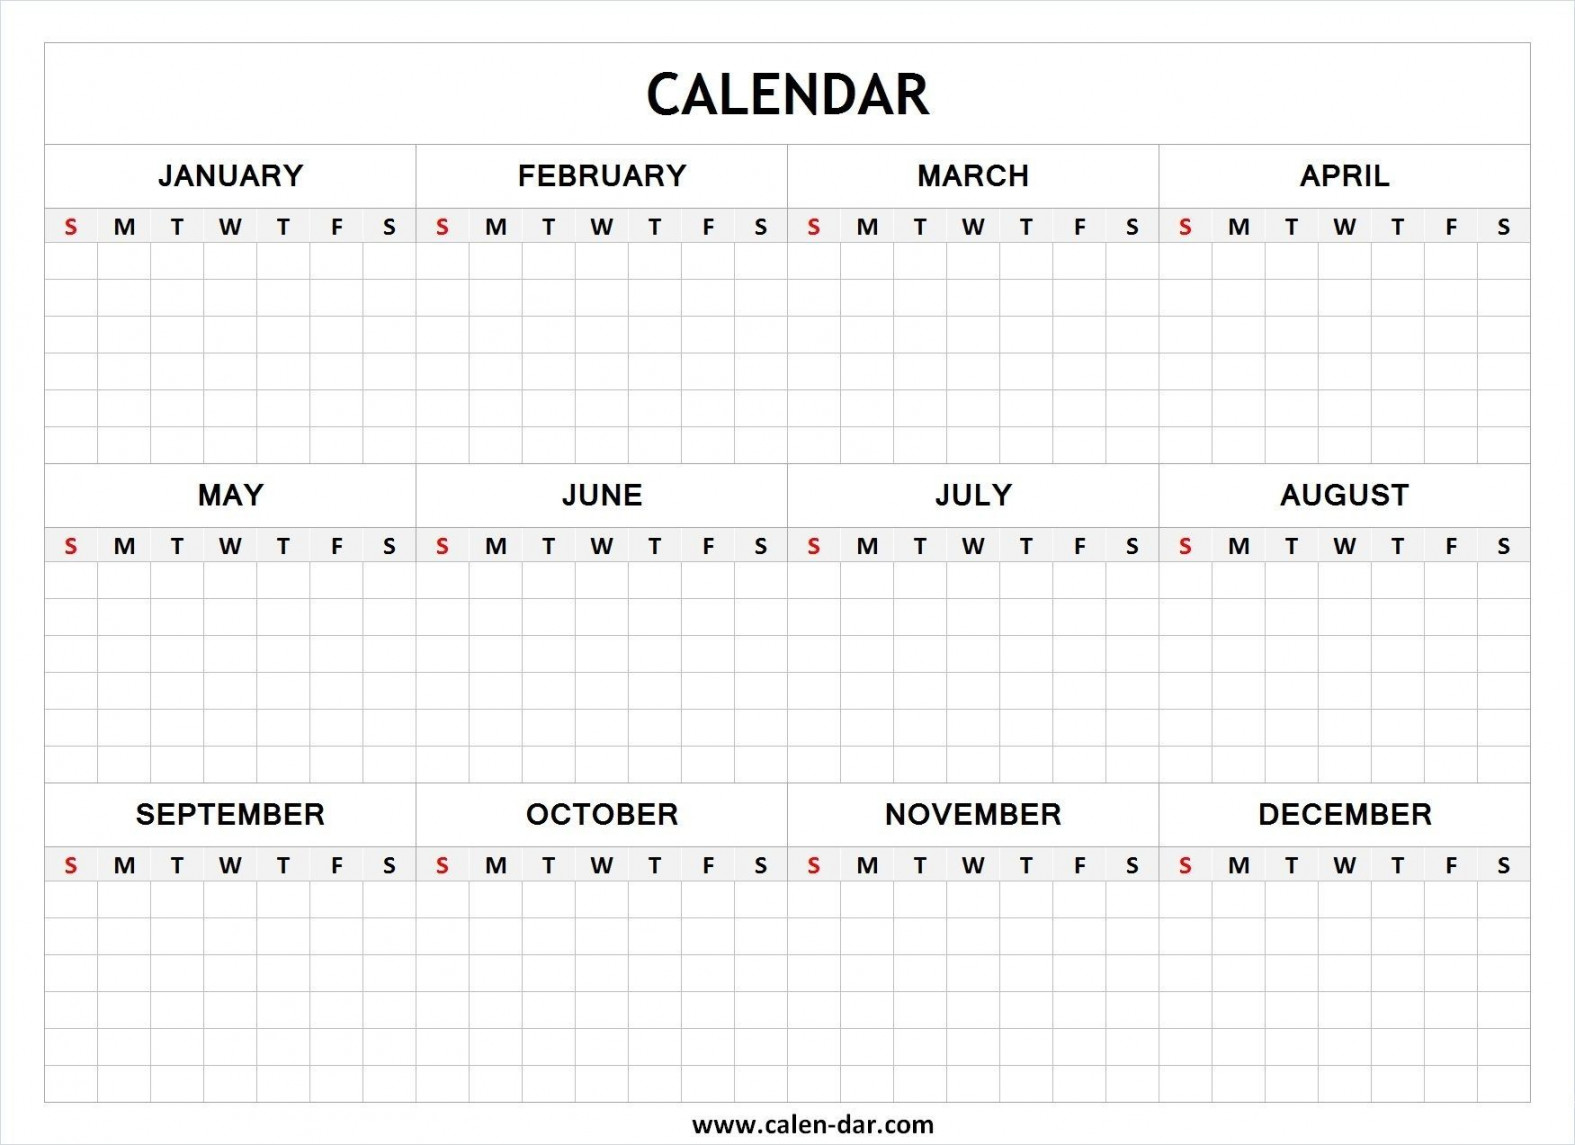 Free Yearly Calendar Template  Blank calendar template, Yearly